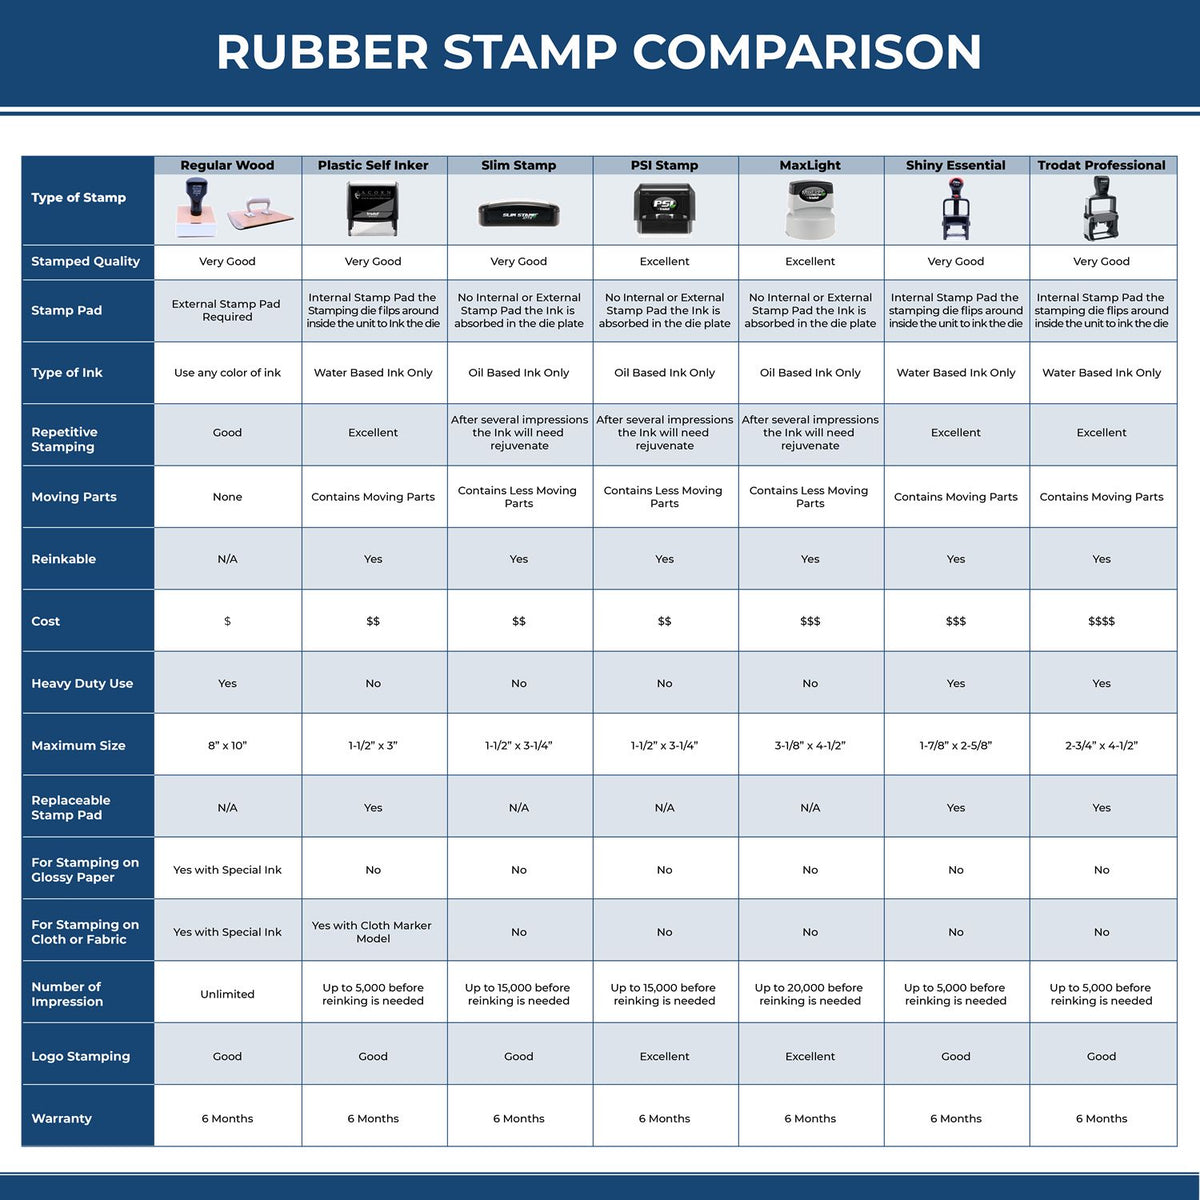 Self-Inking Covid-19 Tested Stamp 4489S Rubber Stamp Comparison